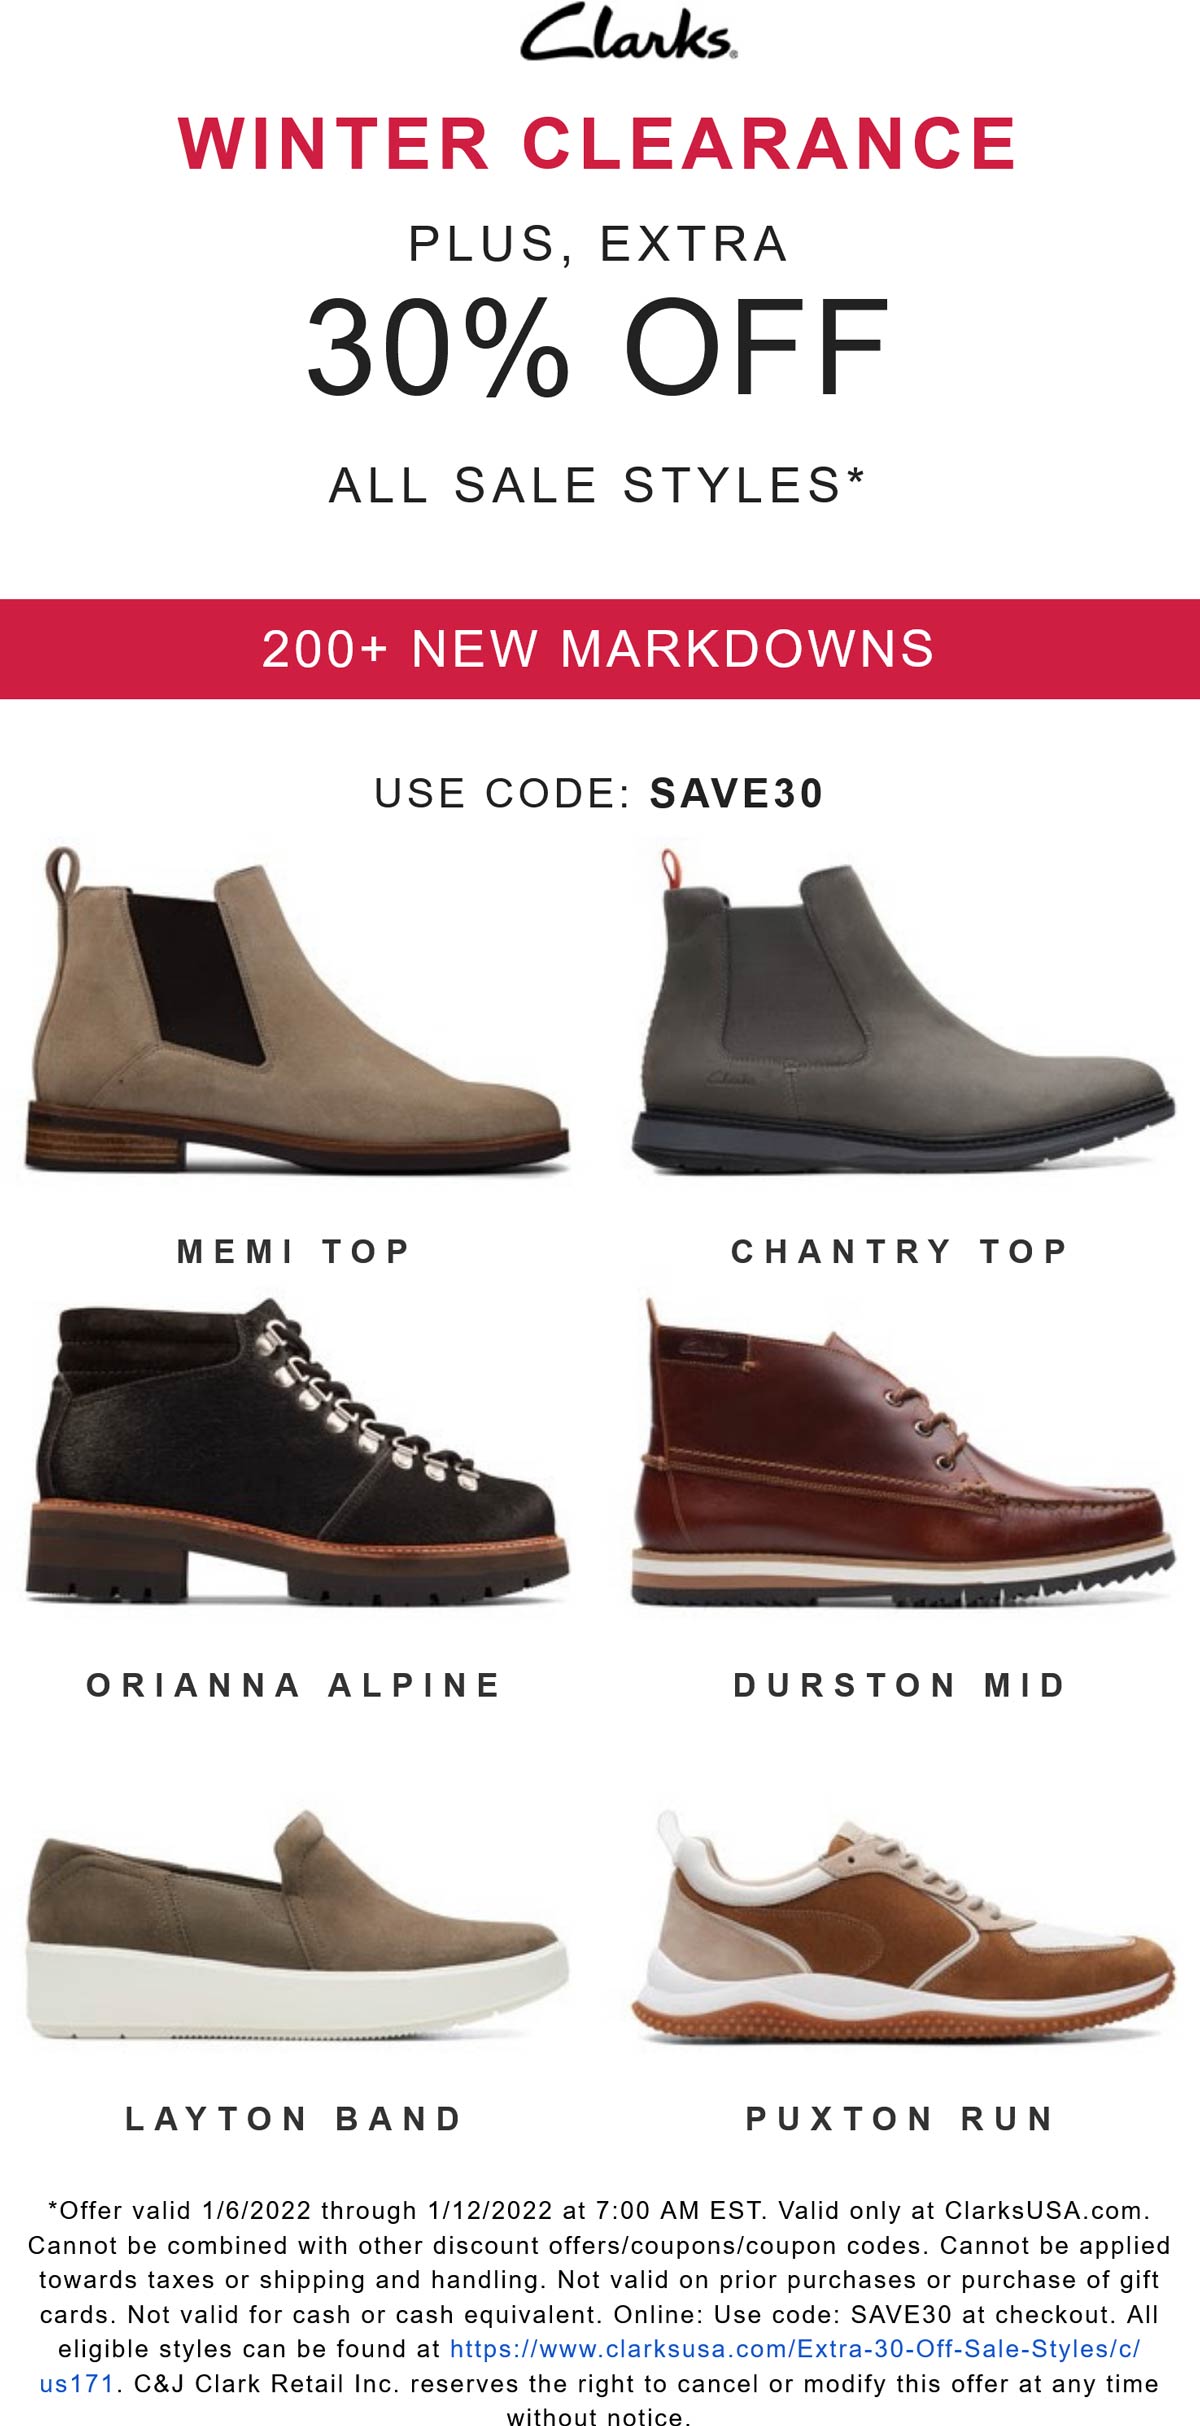 Clarks stores Coupon  Extra 30% off sale styles at Clarks shoes via promo code SAVE30 #clarks 